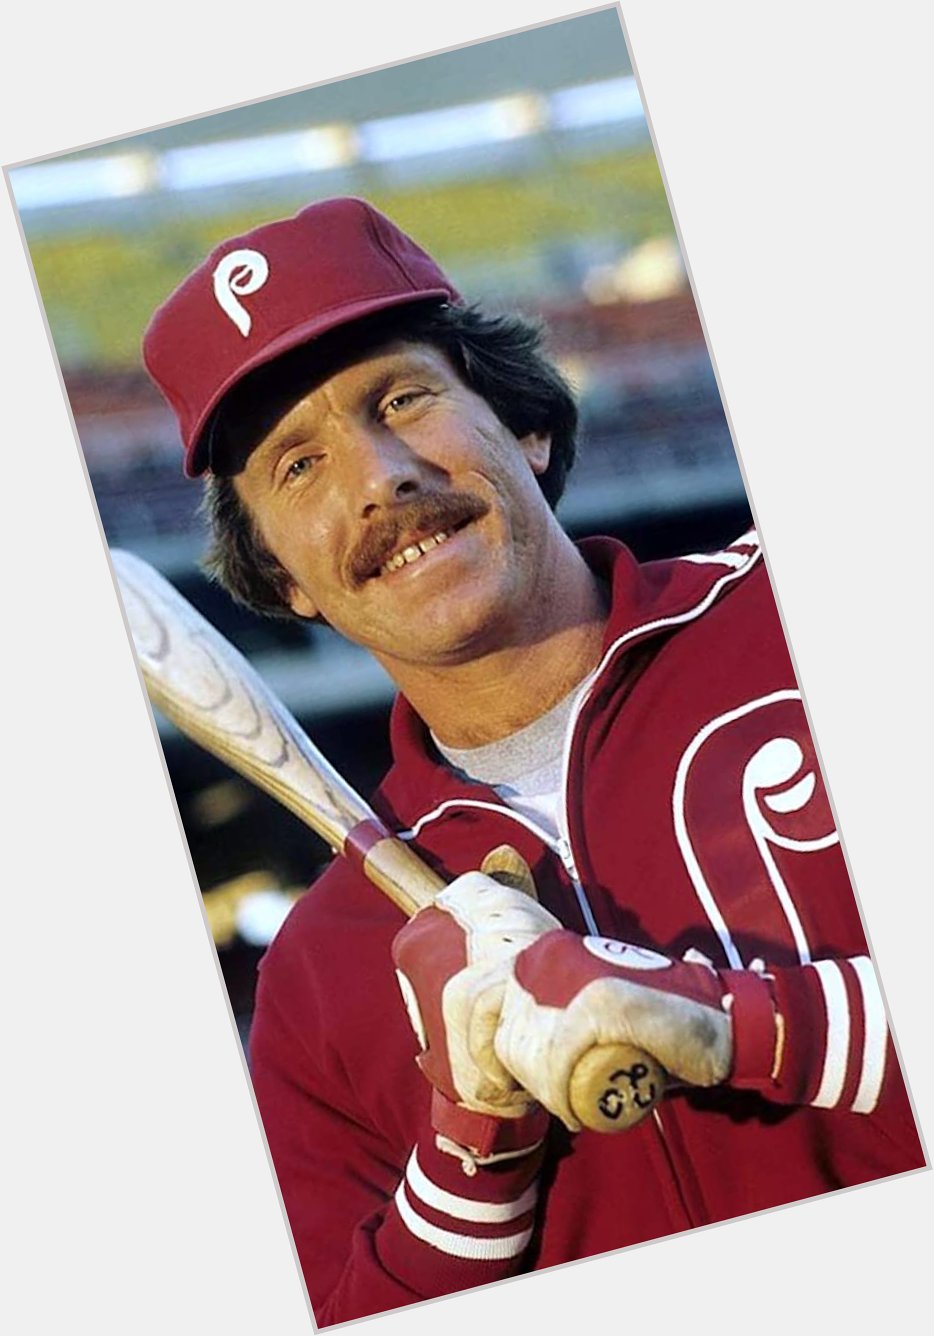 Happy 71st birthday to Hall of Famer Mike Schmidt. 